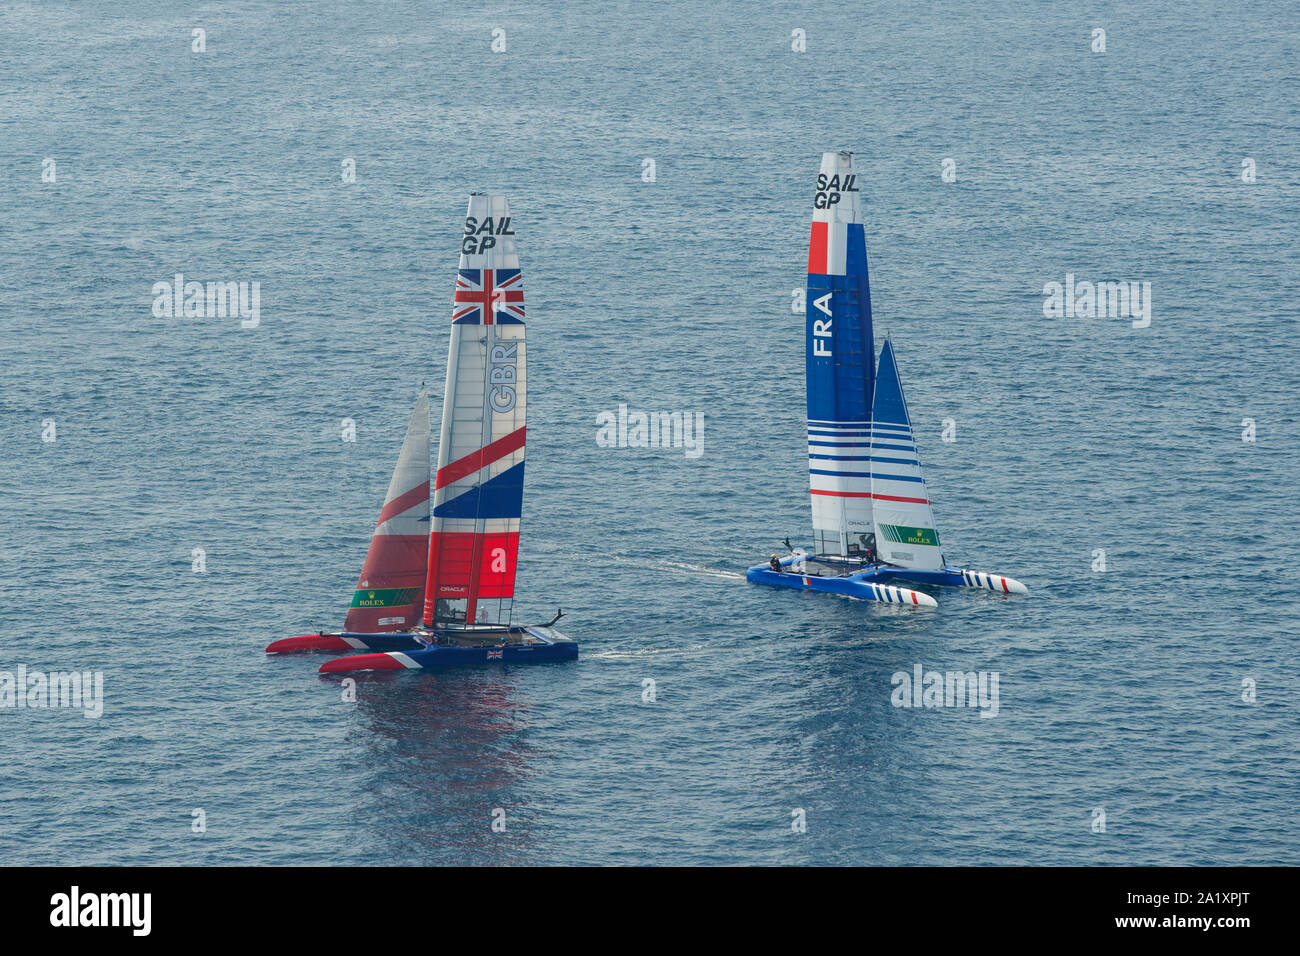 An aerial view of the Great Britain SailGP and Sail GP France Team F50 catamarans during the practice race before the final SailGP event of Season 1 i Stock Photo